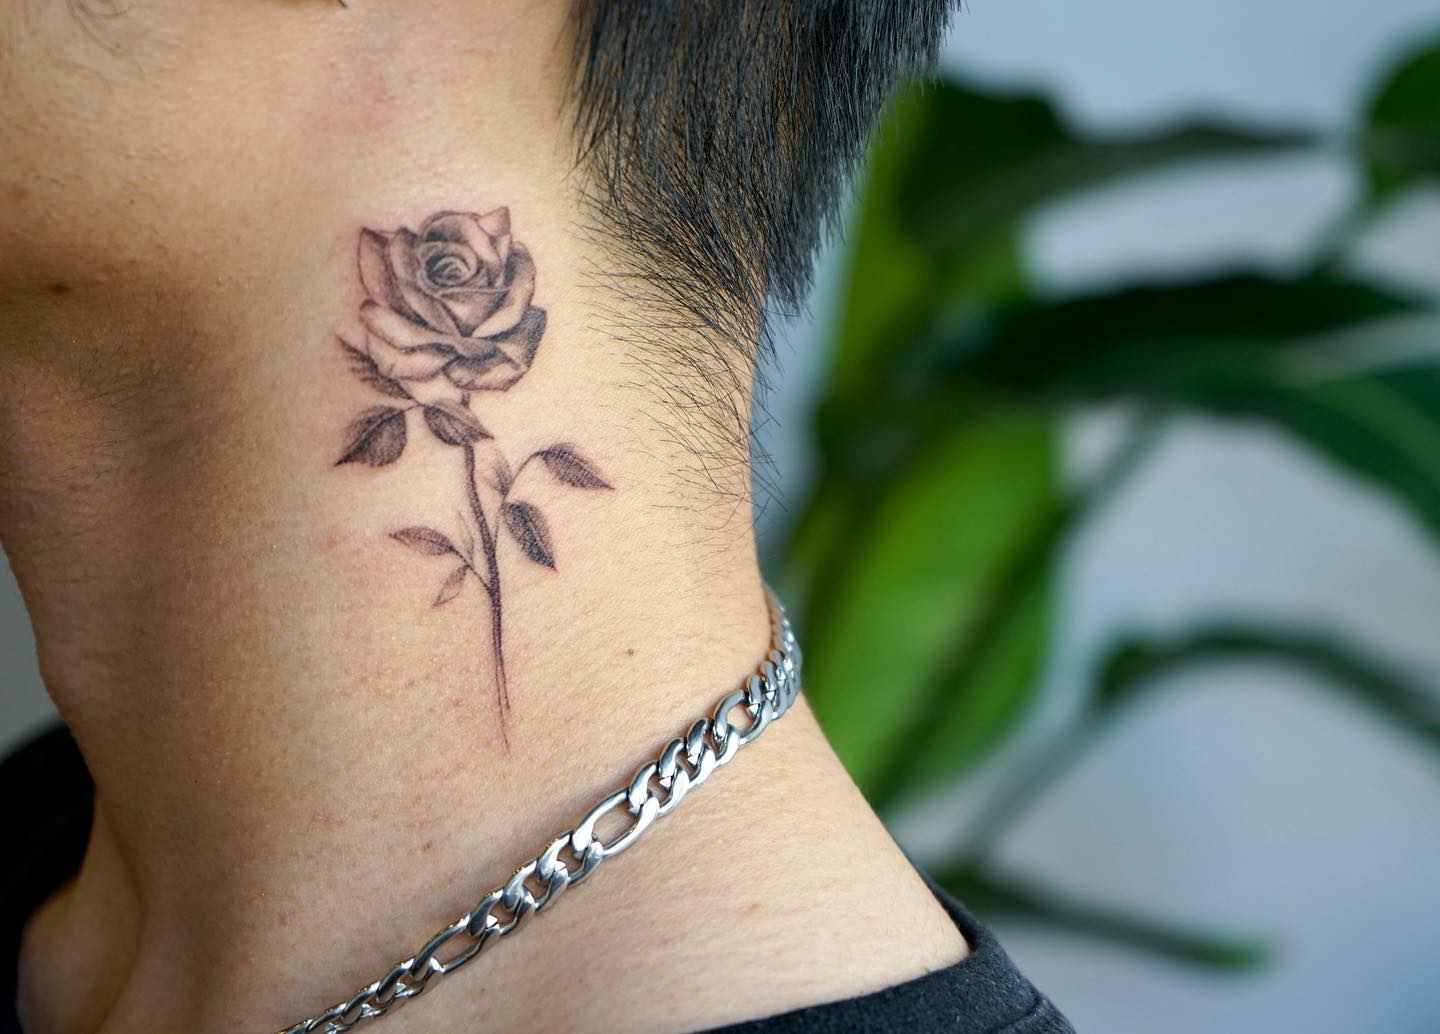 6. "Kiss Land" tattoo with a rose and thorns - wide 4